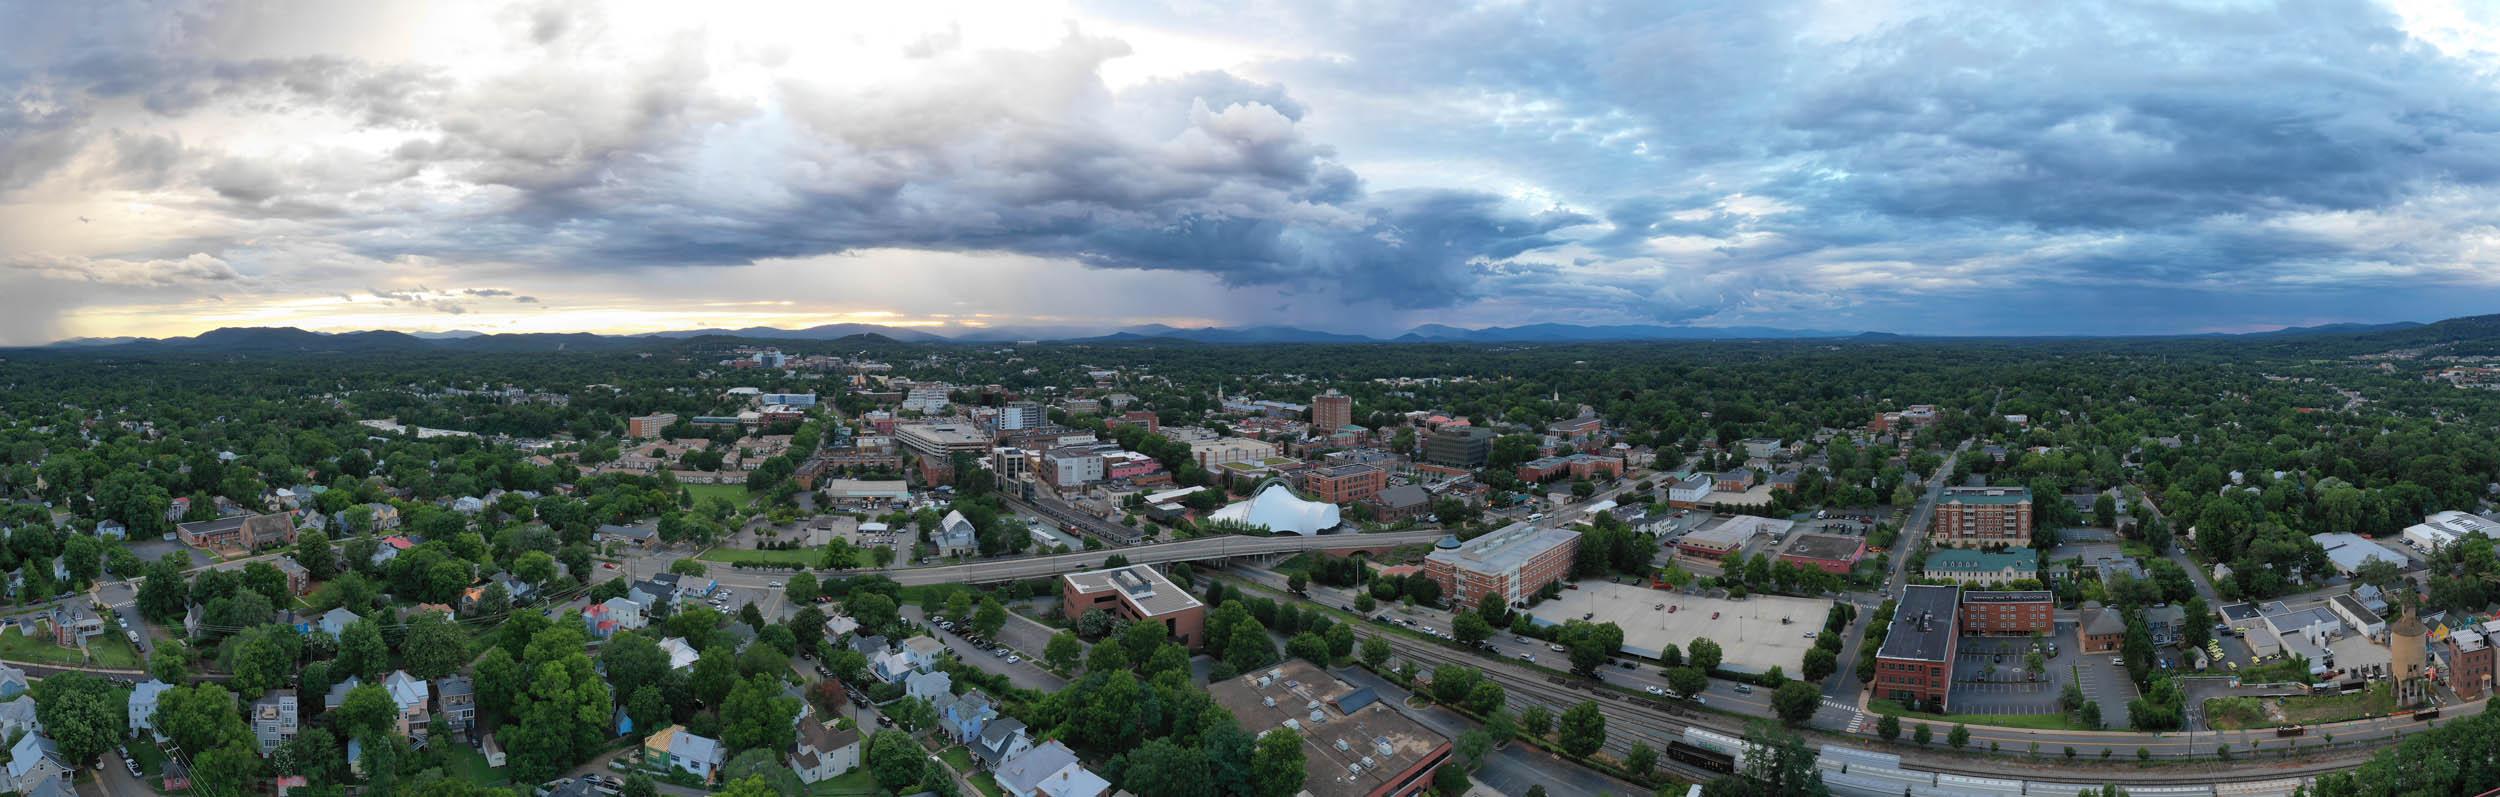 aerial view of downtown Charlottesville